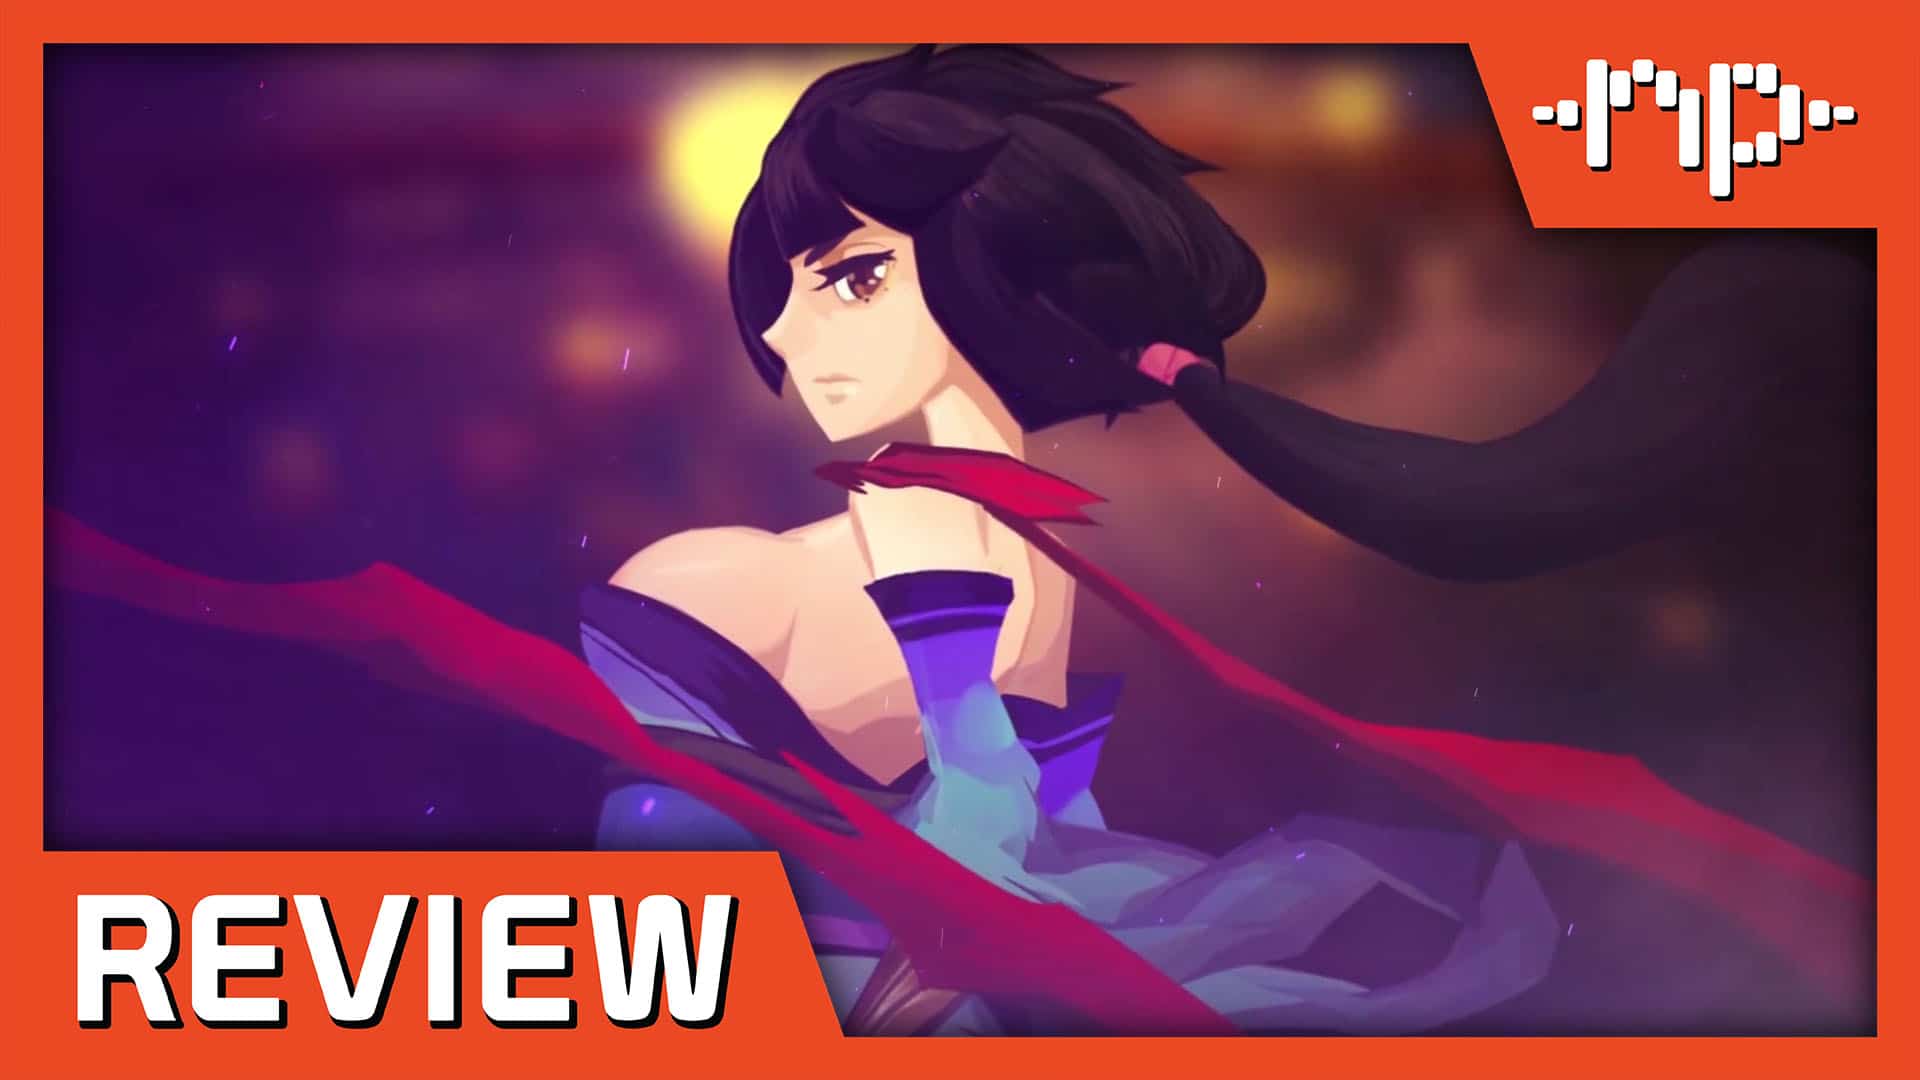 Bladed fury Review – Now on Console, No Excuses